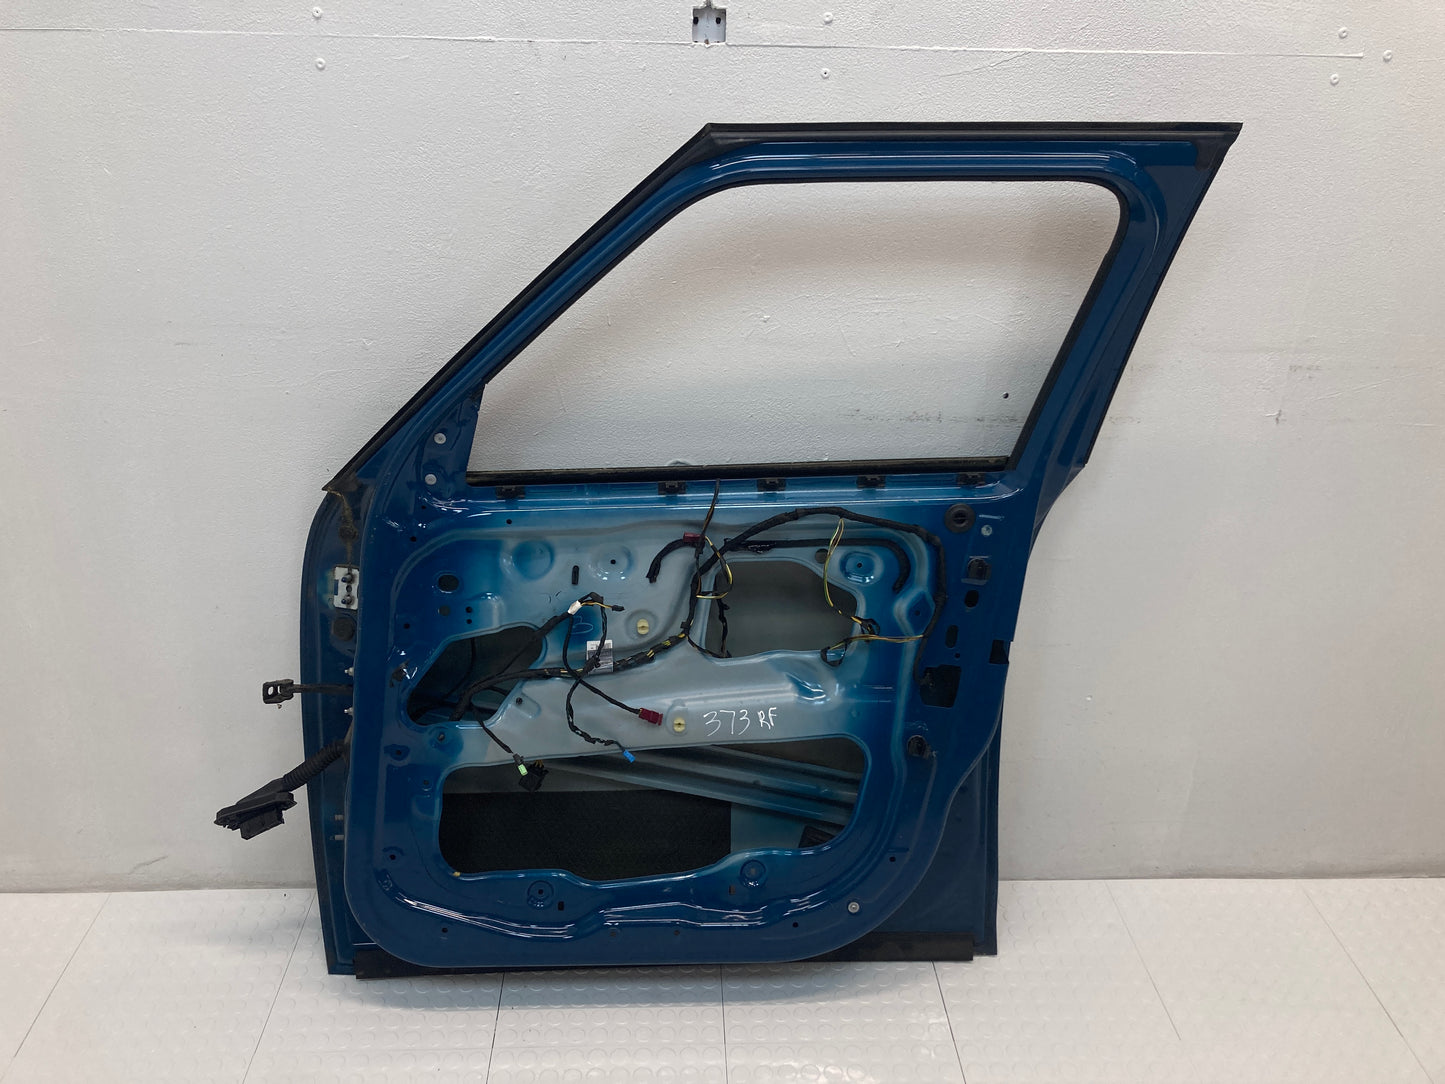 Mini Countryman Right Front Door Shell Surf Blue 41009805928 11-16 R60 373